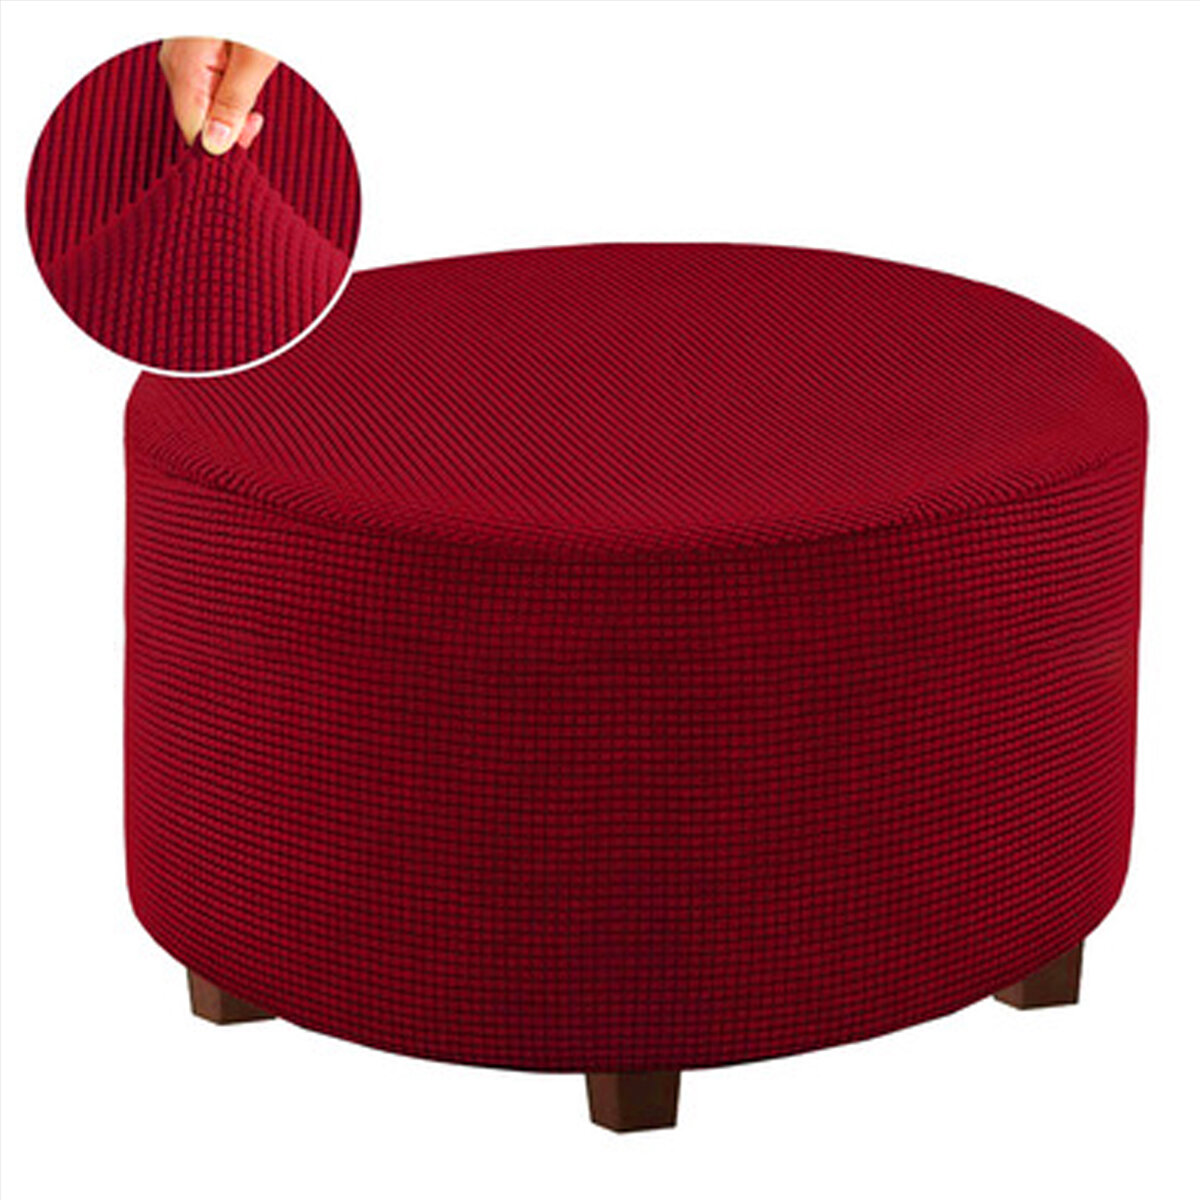 

Elastic Round Ottoman Cover Footstool Protector Stretch Storage Stool Chair Seat Slipcover Home Office Furniture Decorat